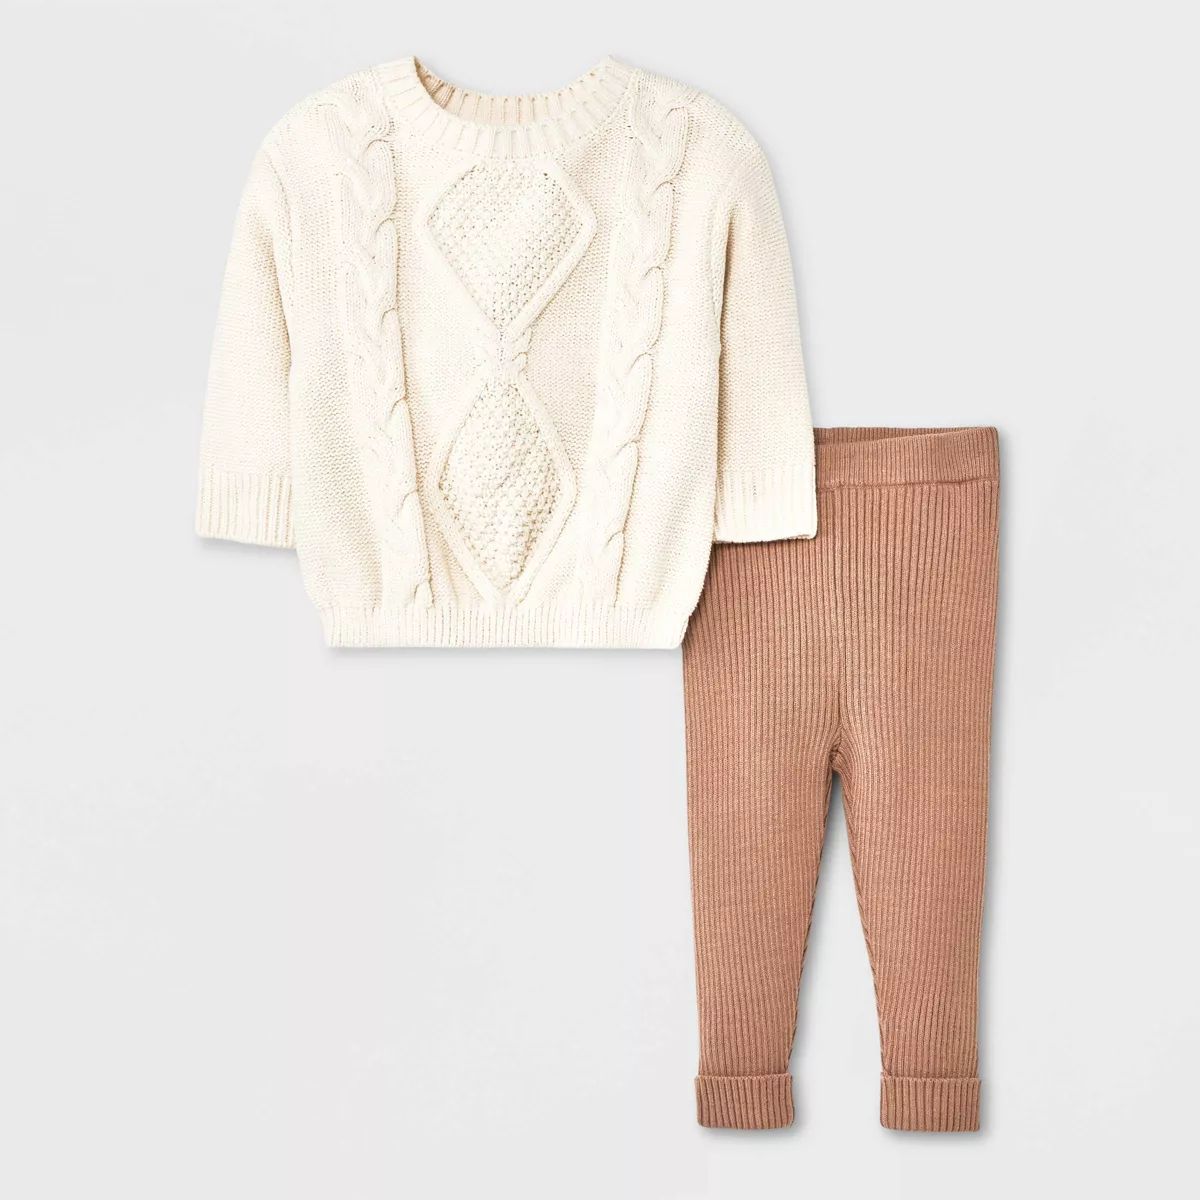 Grayson Collective Baby Cable Knit Pullover Sweater & Leggings Set - Cream/Brown | Target